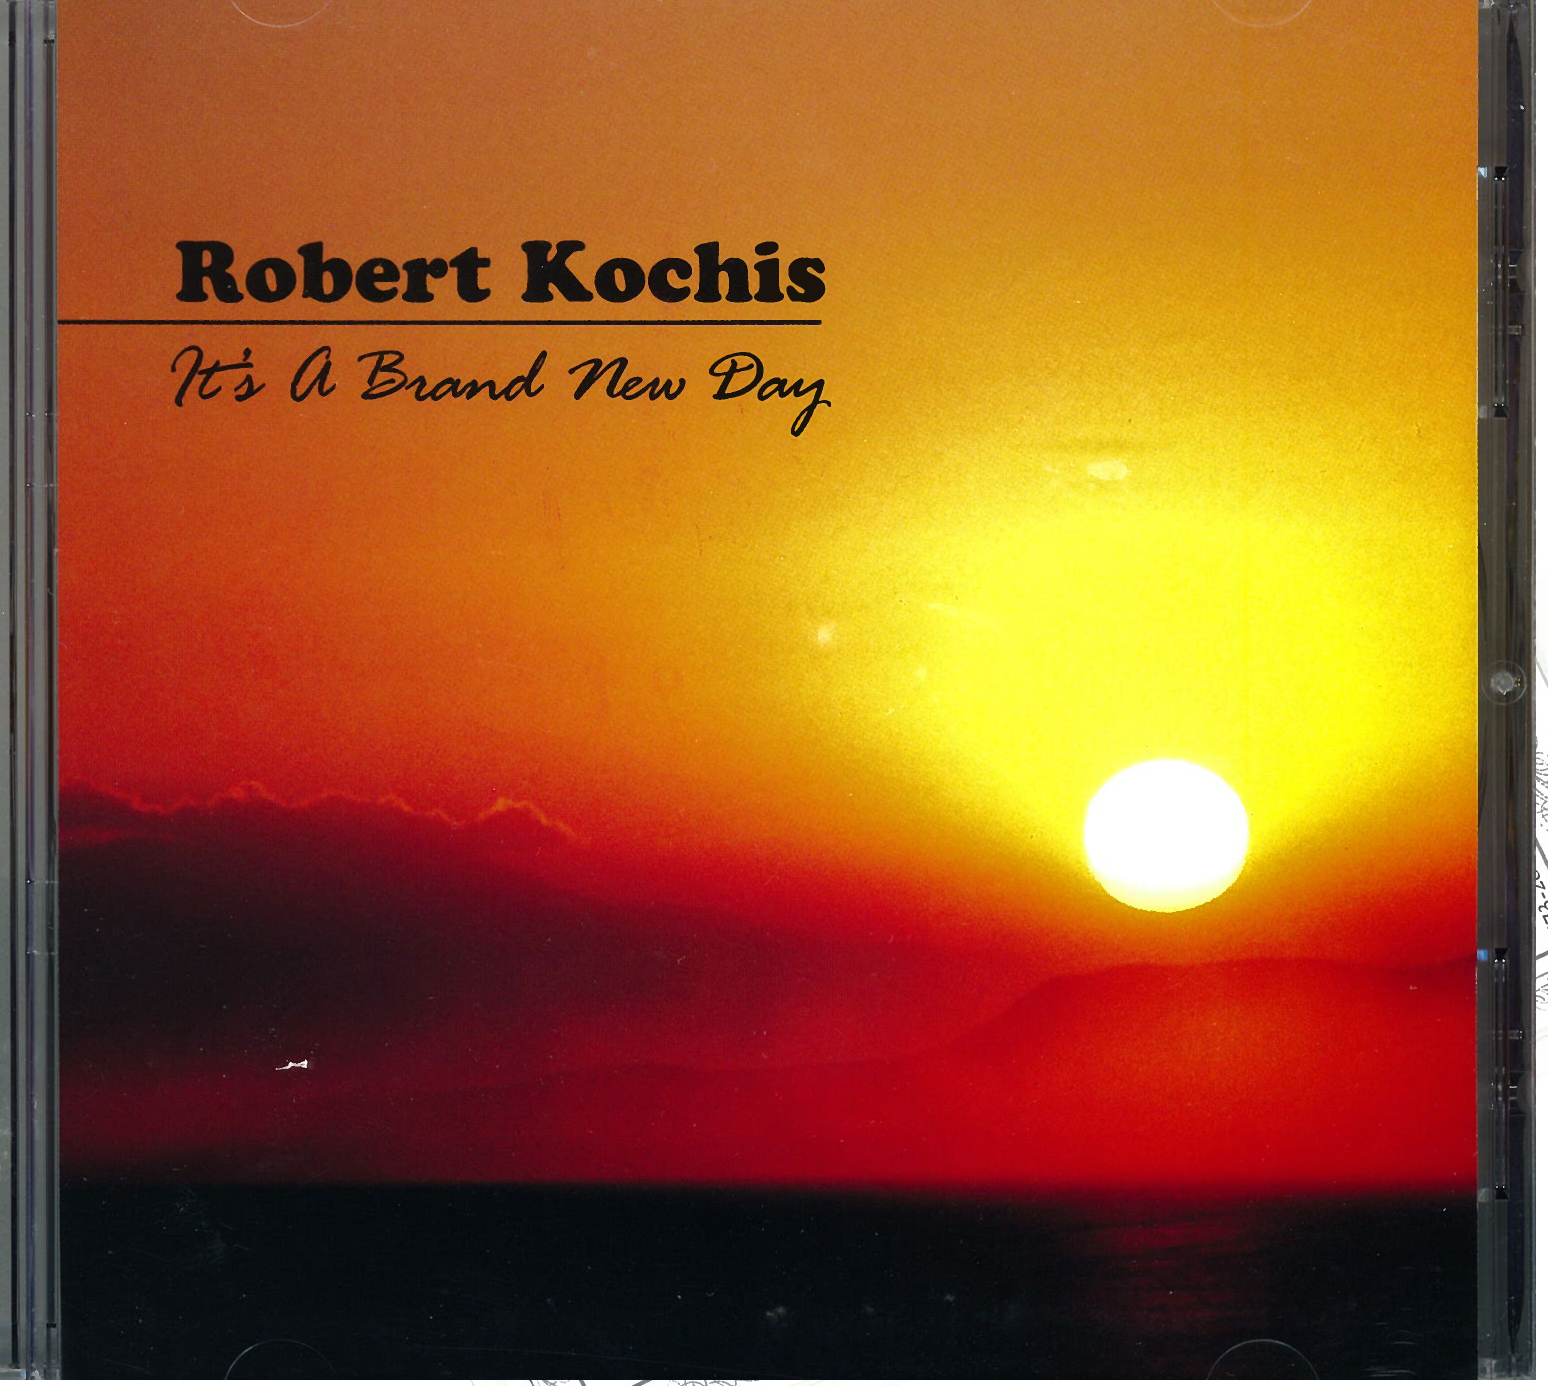 It's A Brand New Day by Robert Kochis 88-5911011102